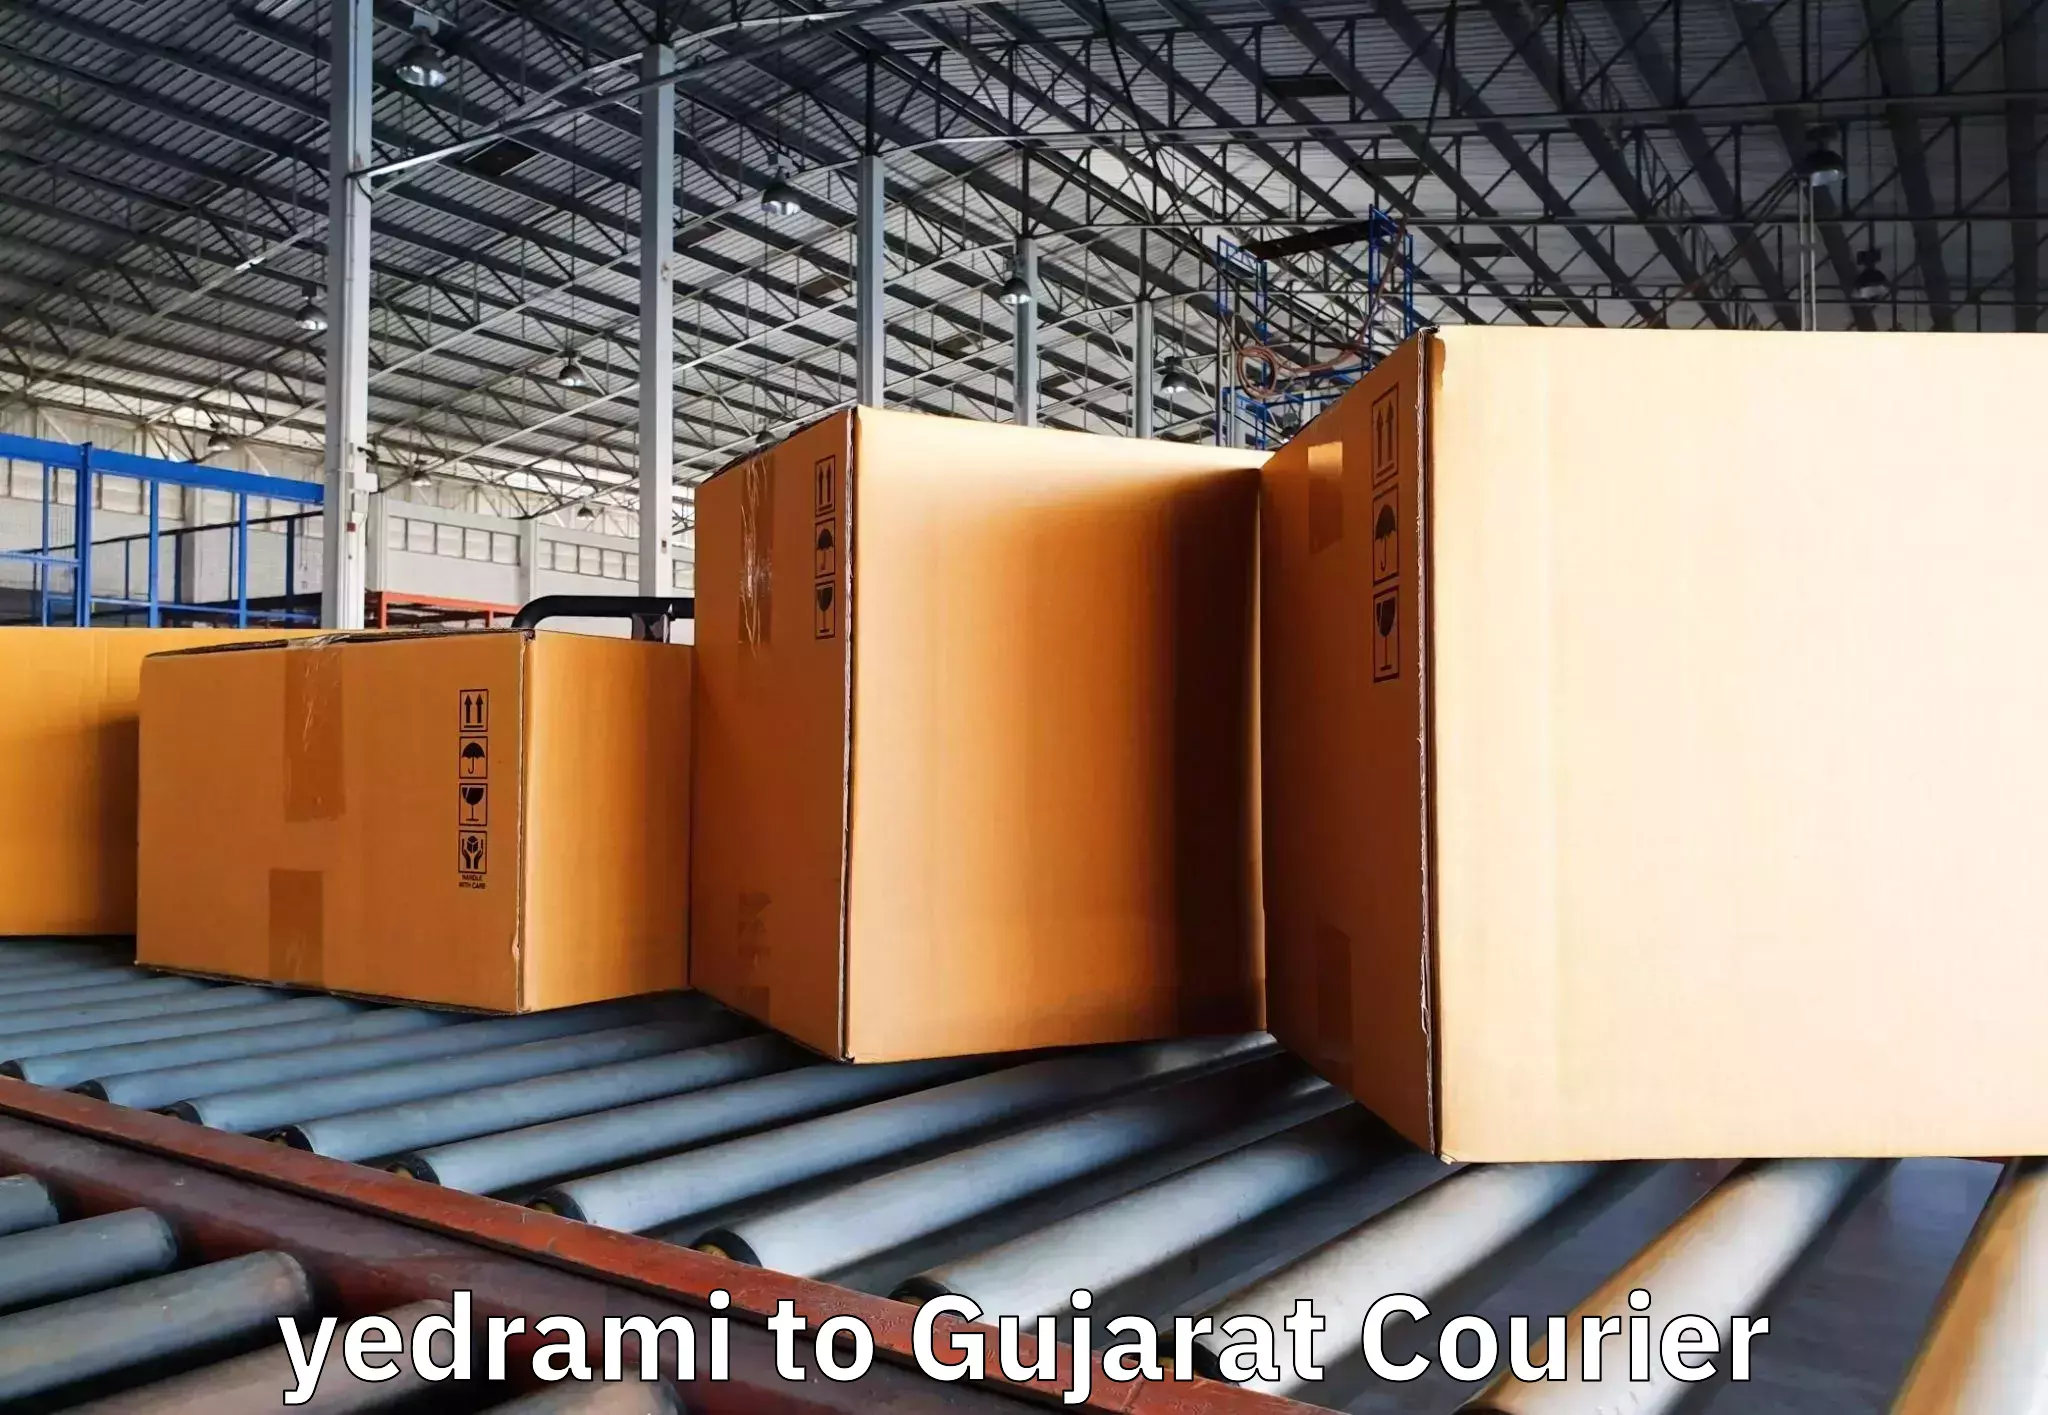 Furniture delivery service in yedrami to Limbdi